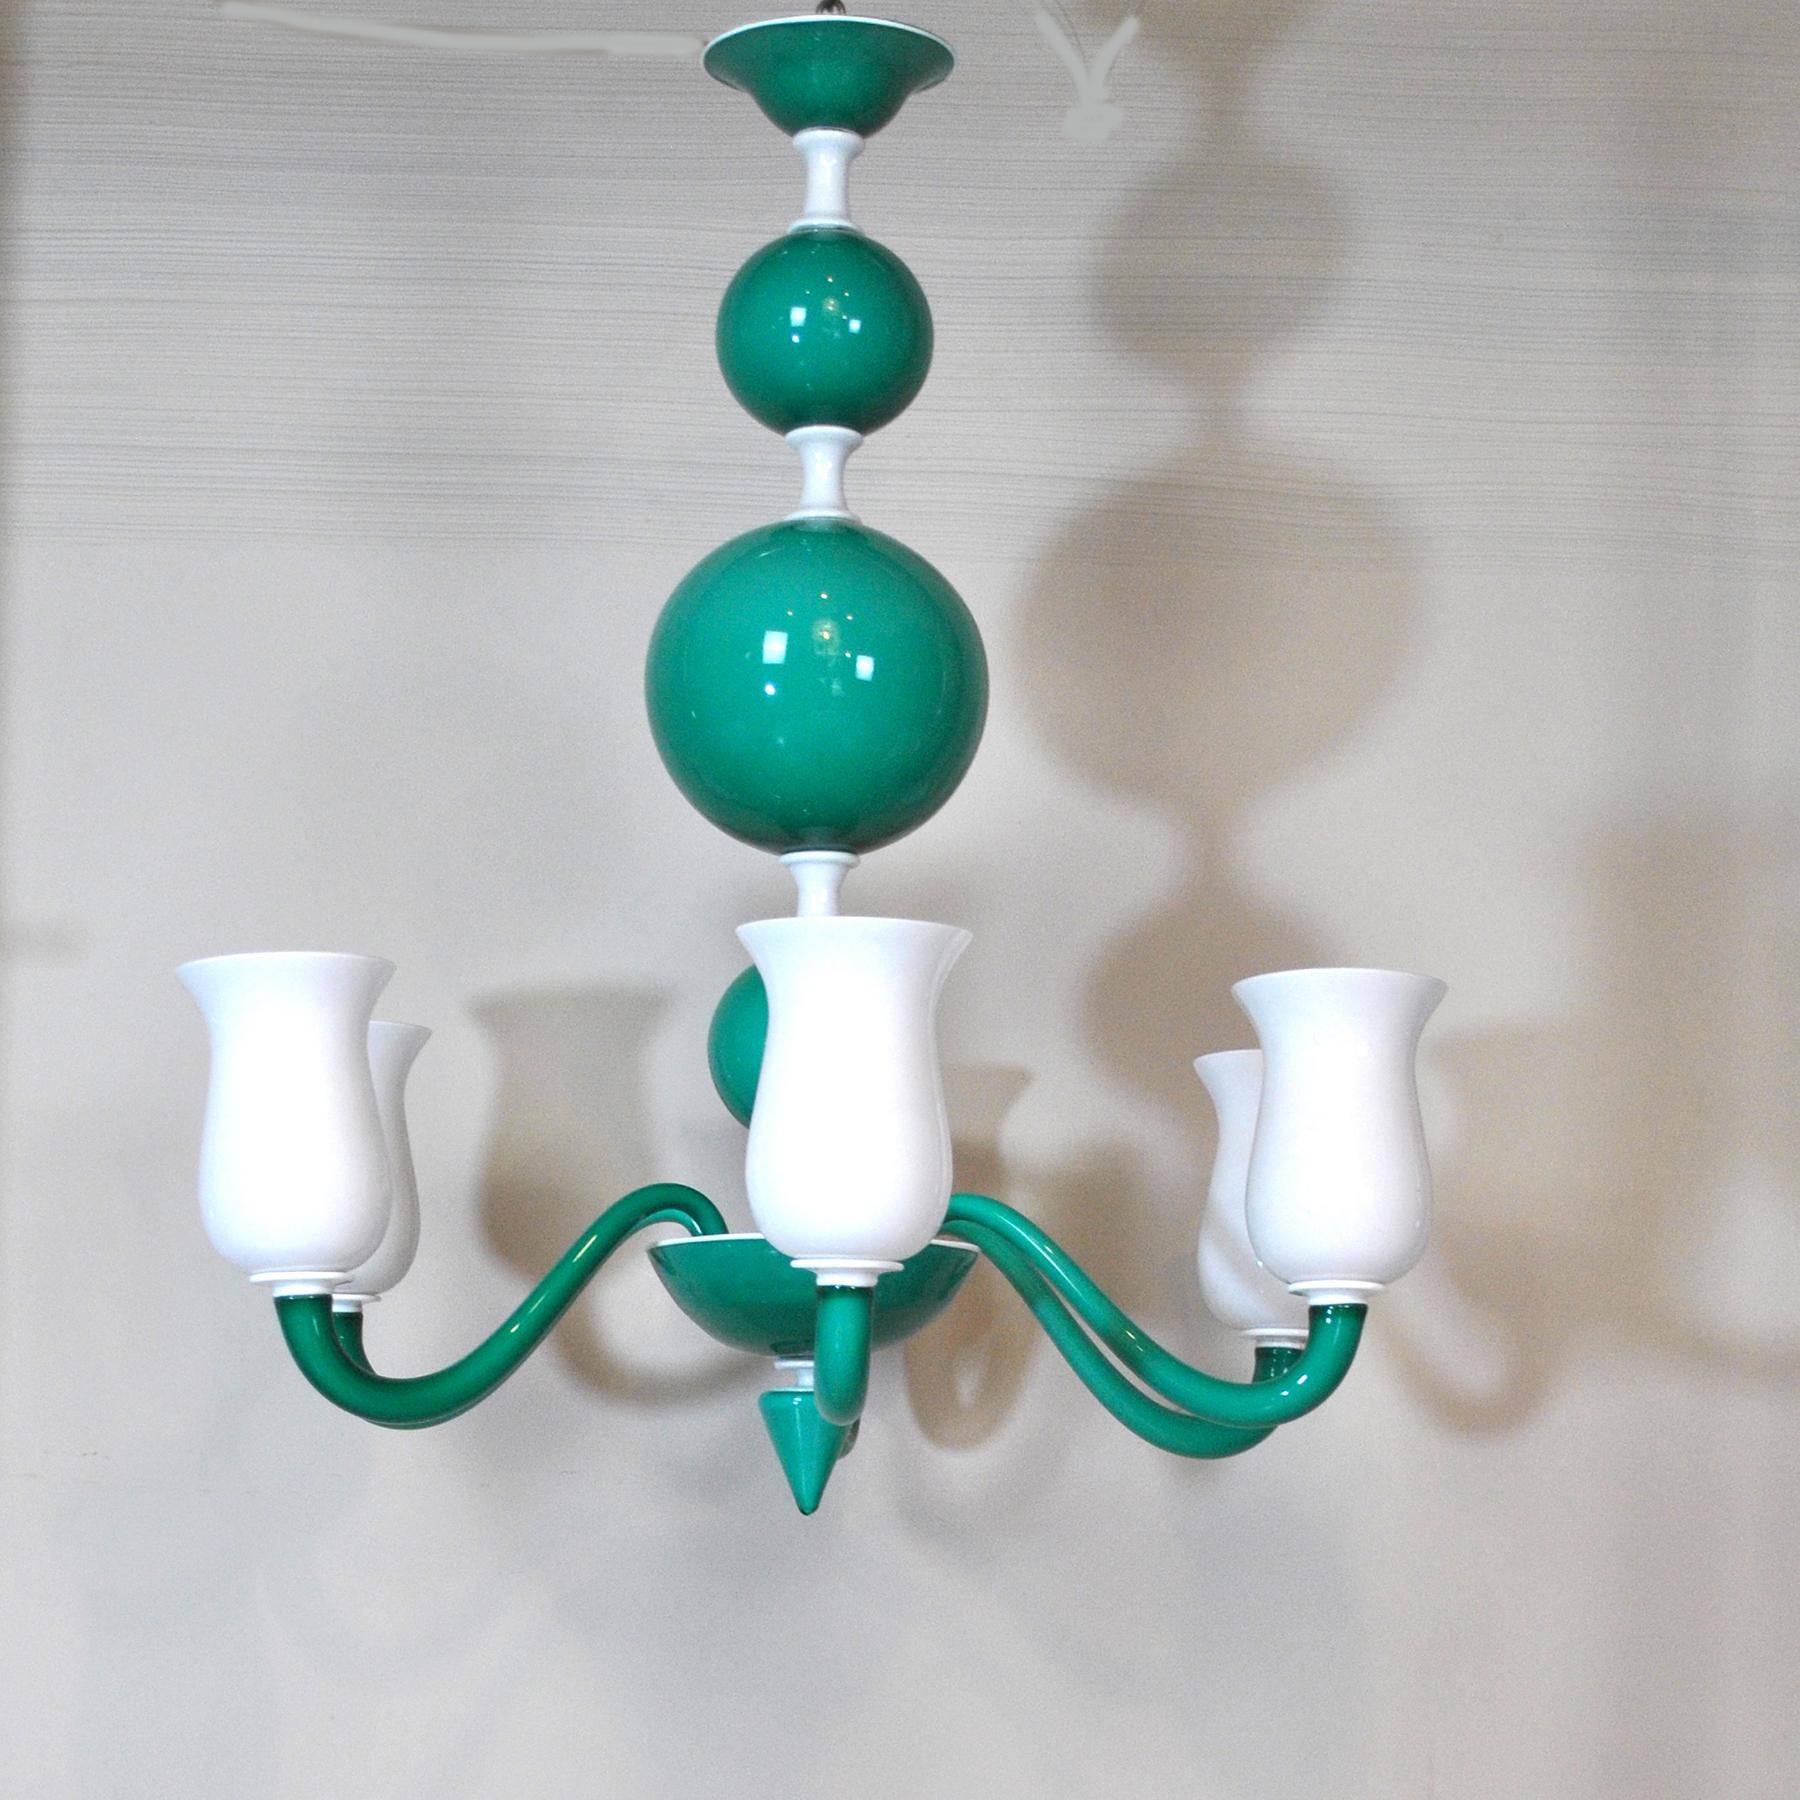 Venini Suspension Lamp a Variant of Model N. 99.41 Gio Ponti For Sale 1